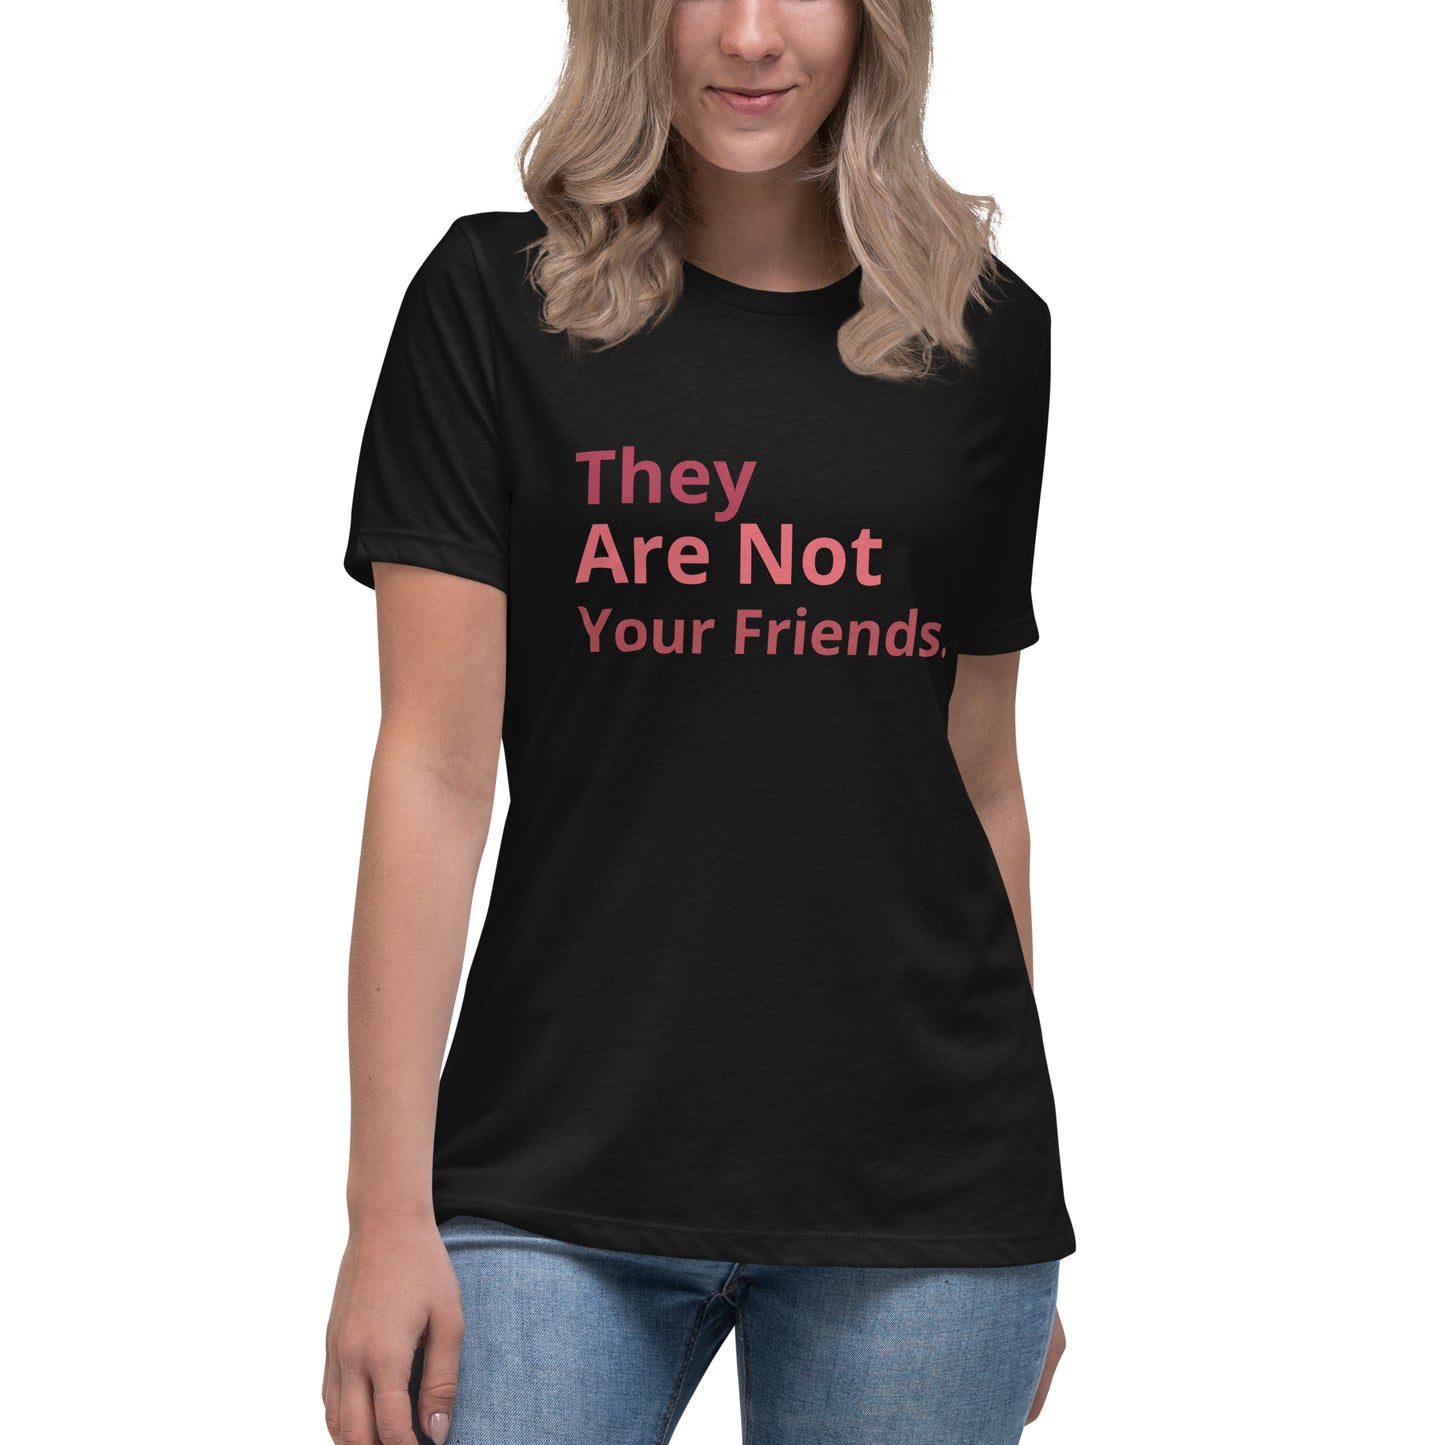 They Are Not Your Friends T-Shirt